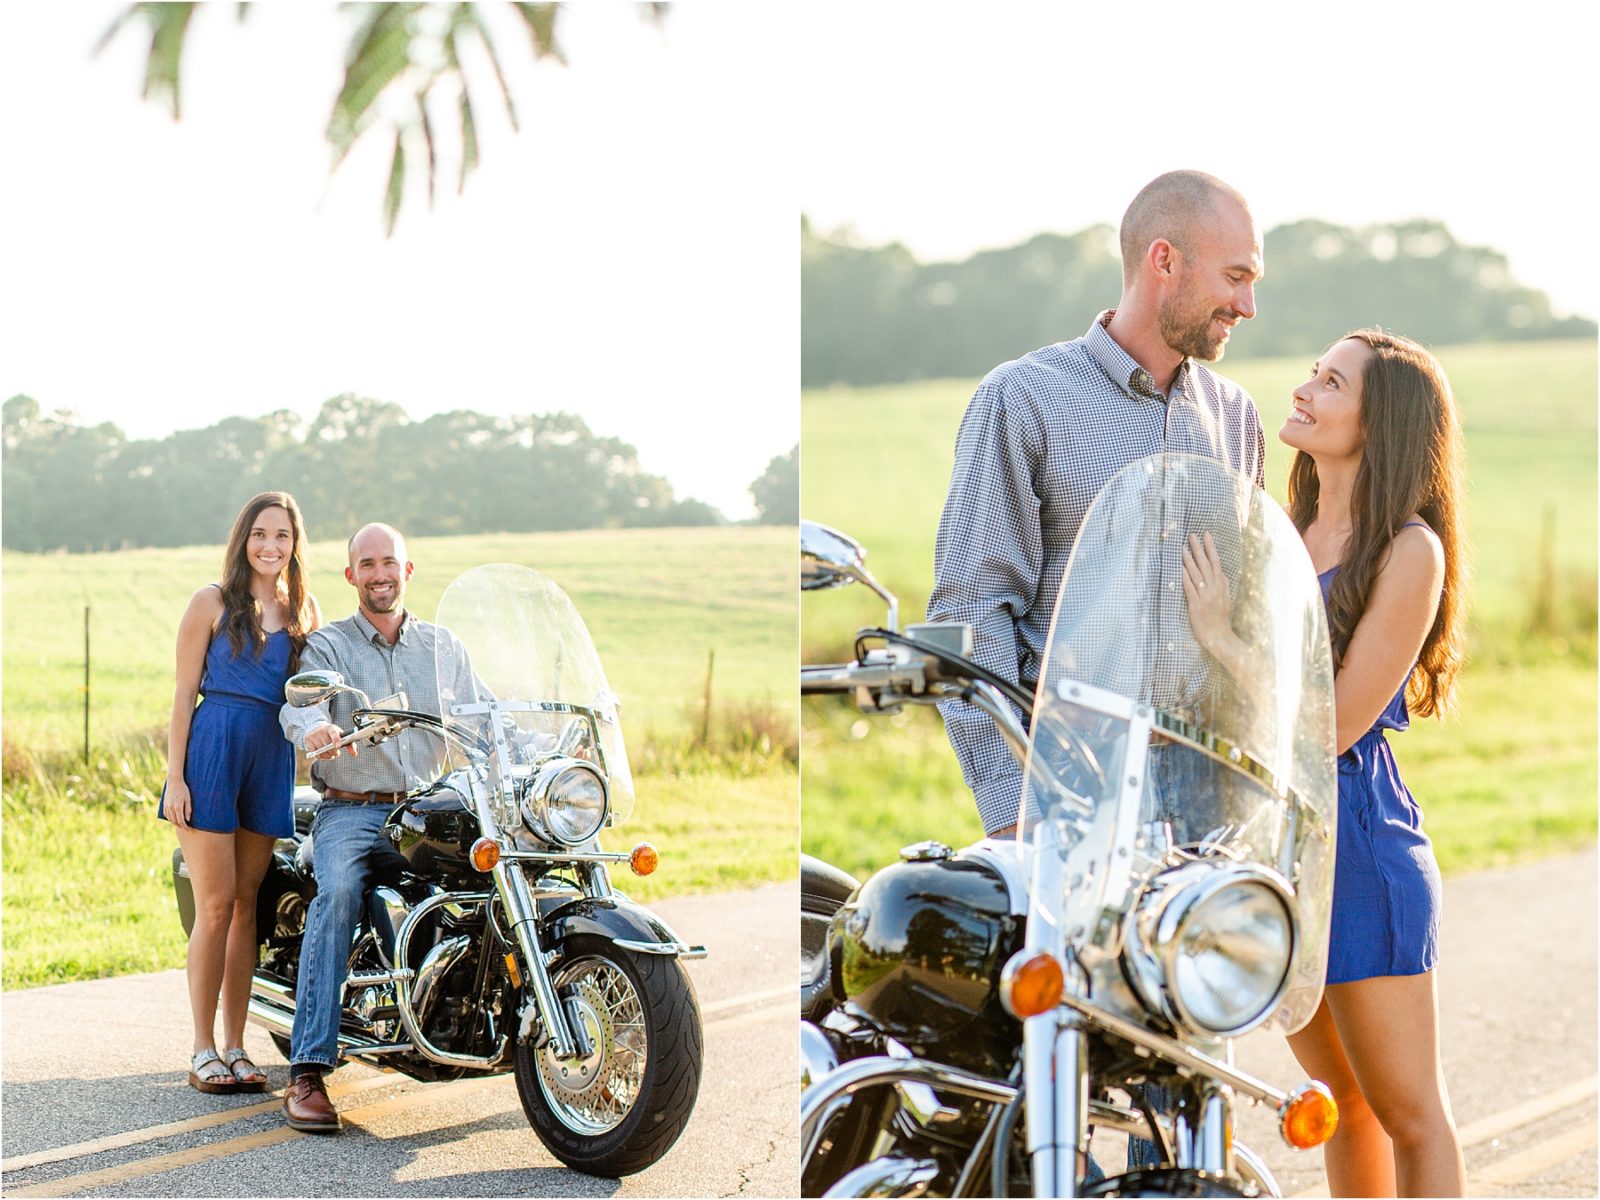 Couple in blue taking pictures next to motorcycle